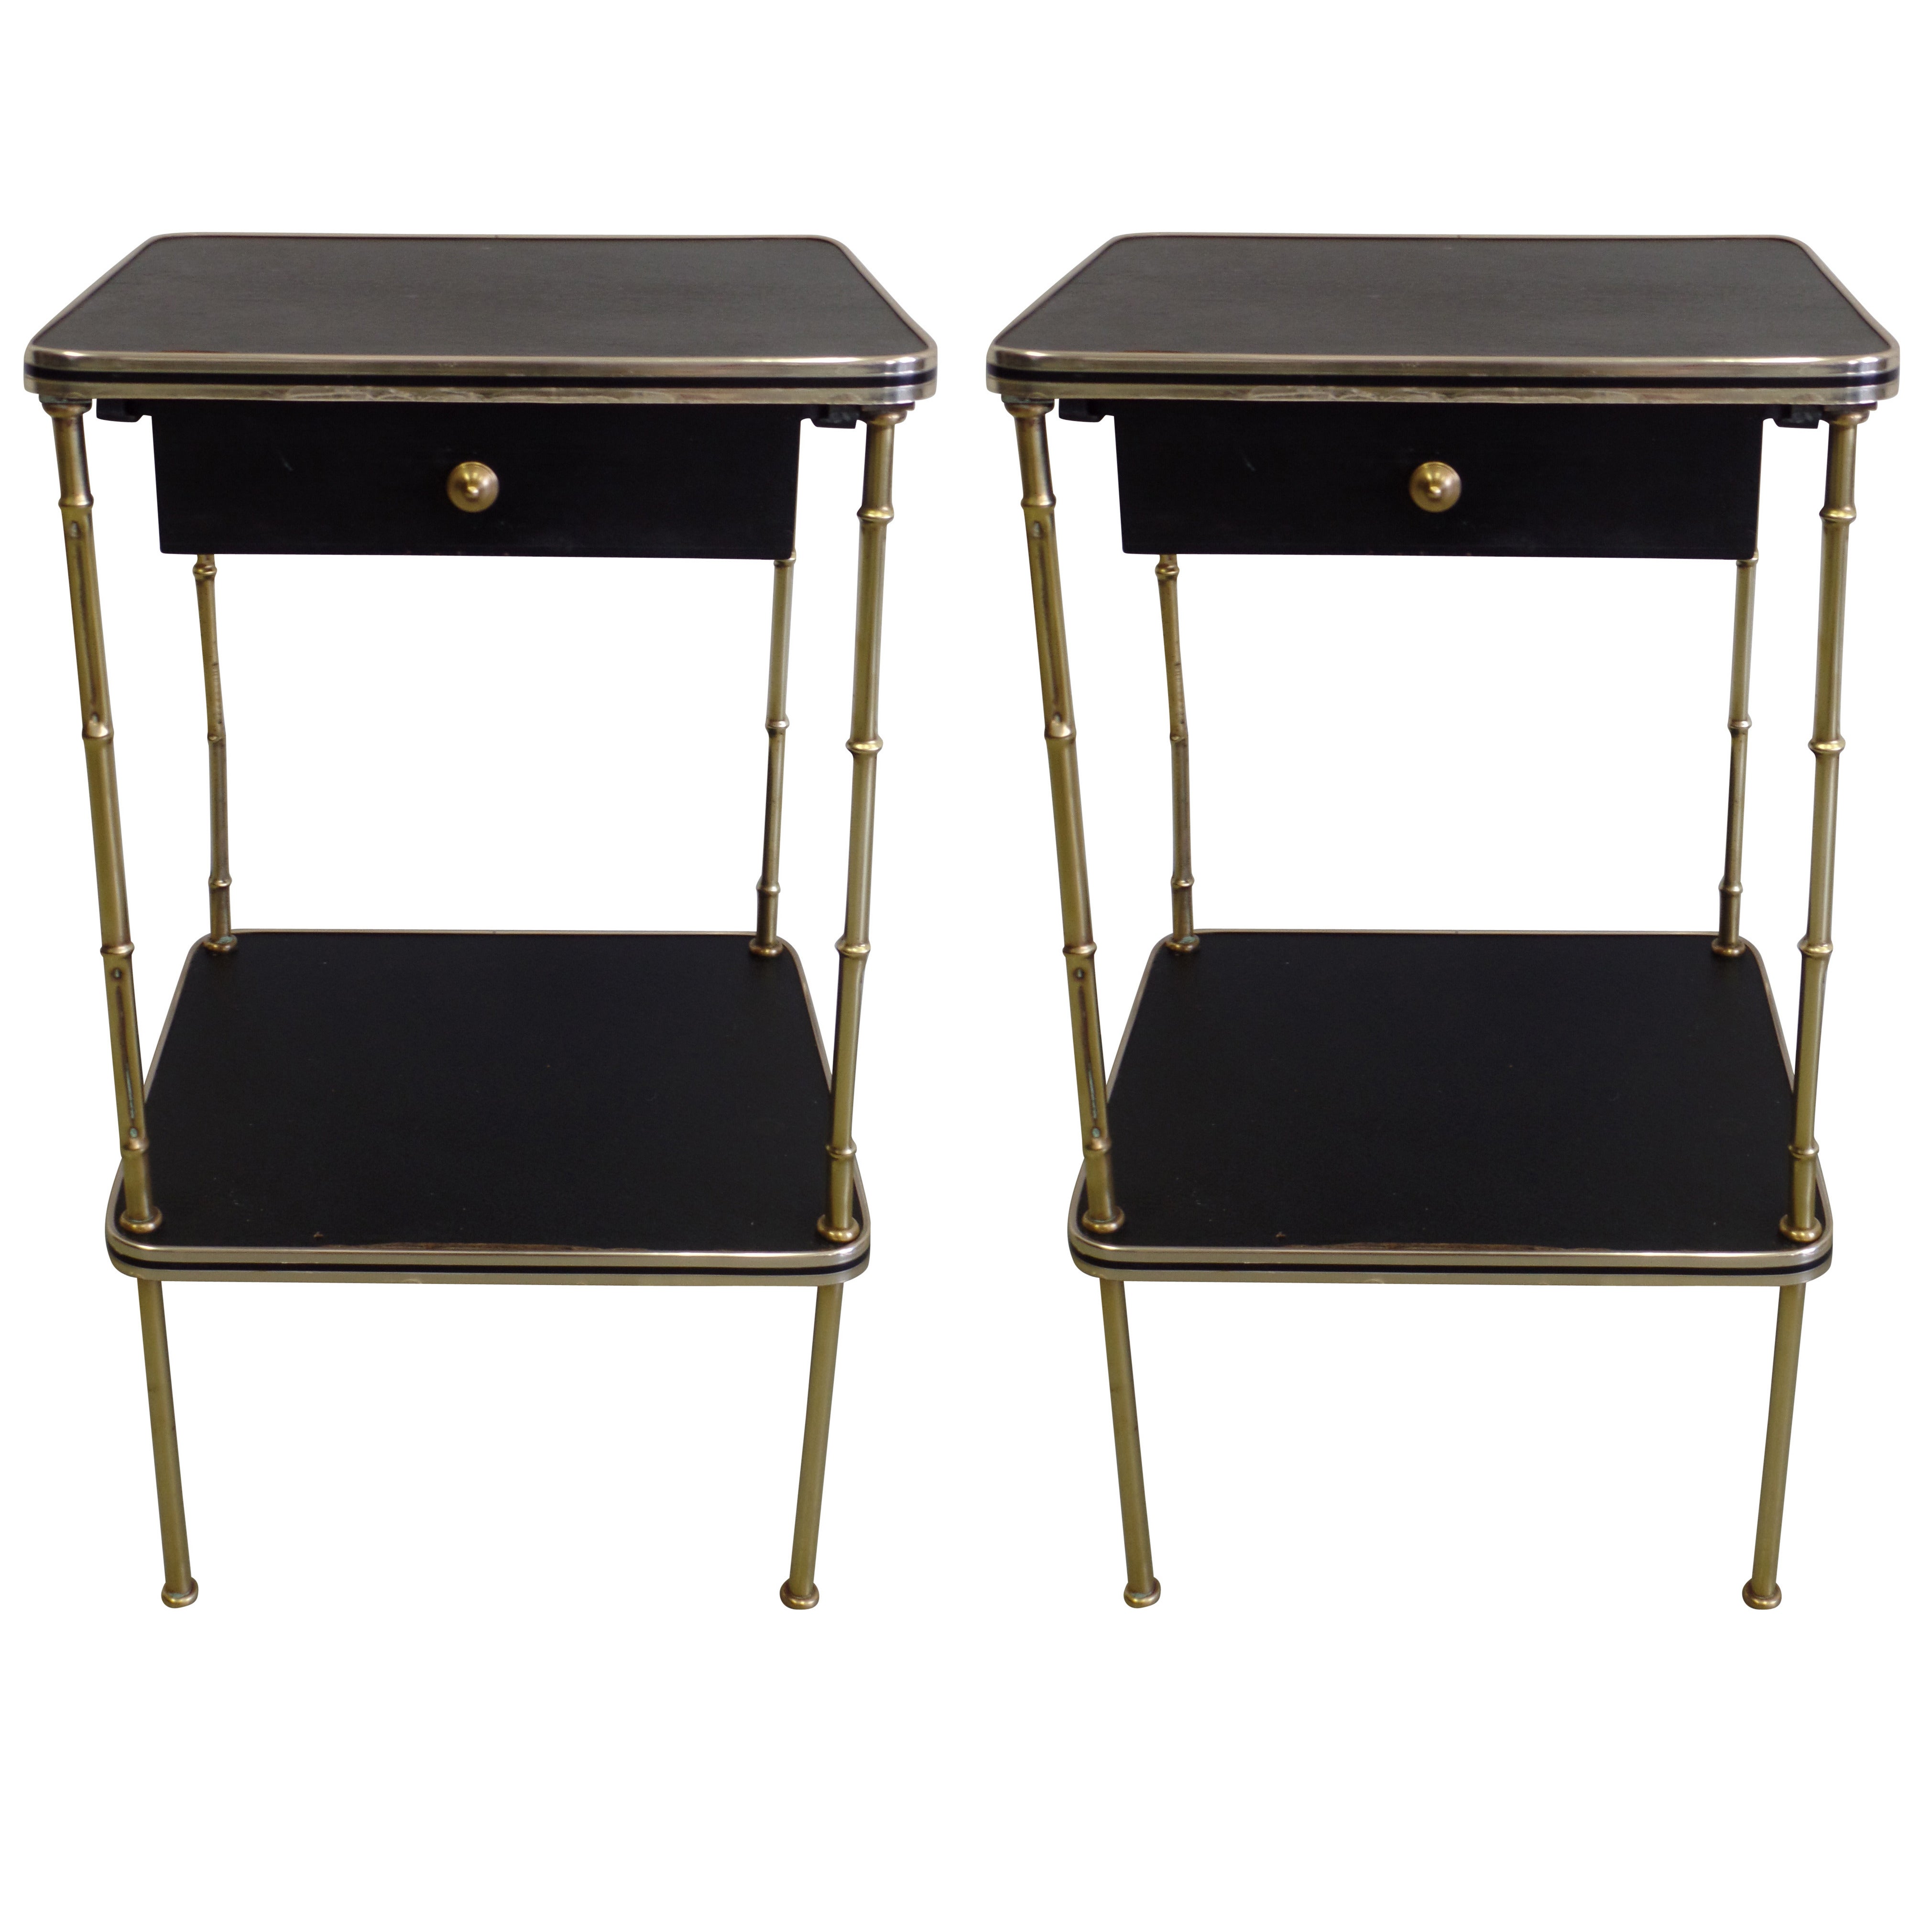 Pair French Faux Bamboo and Leather Side Tables / Nightstands by Jacques Adnet